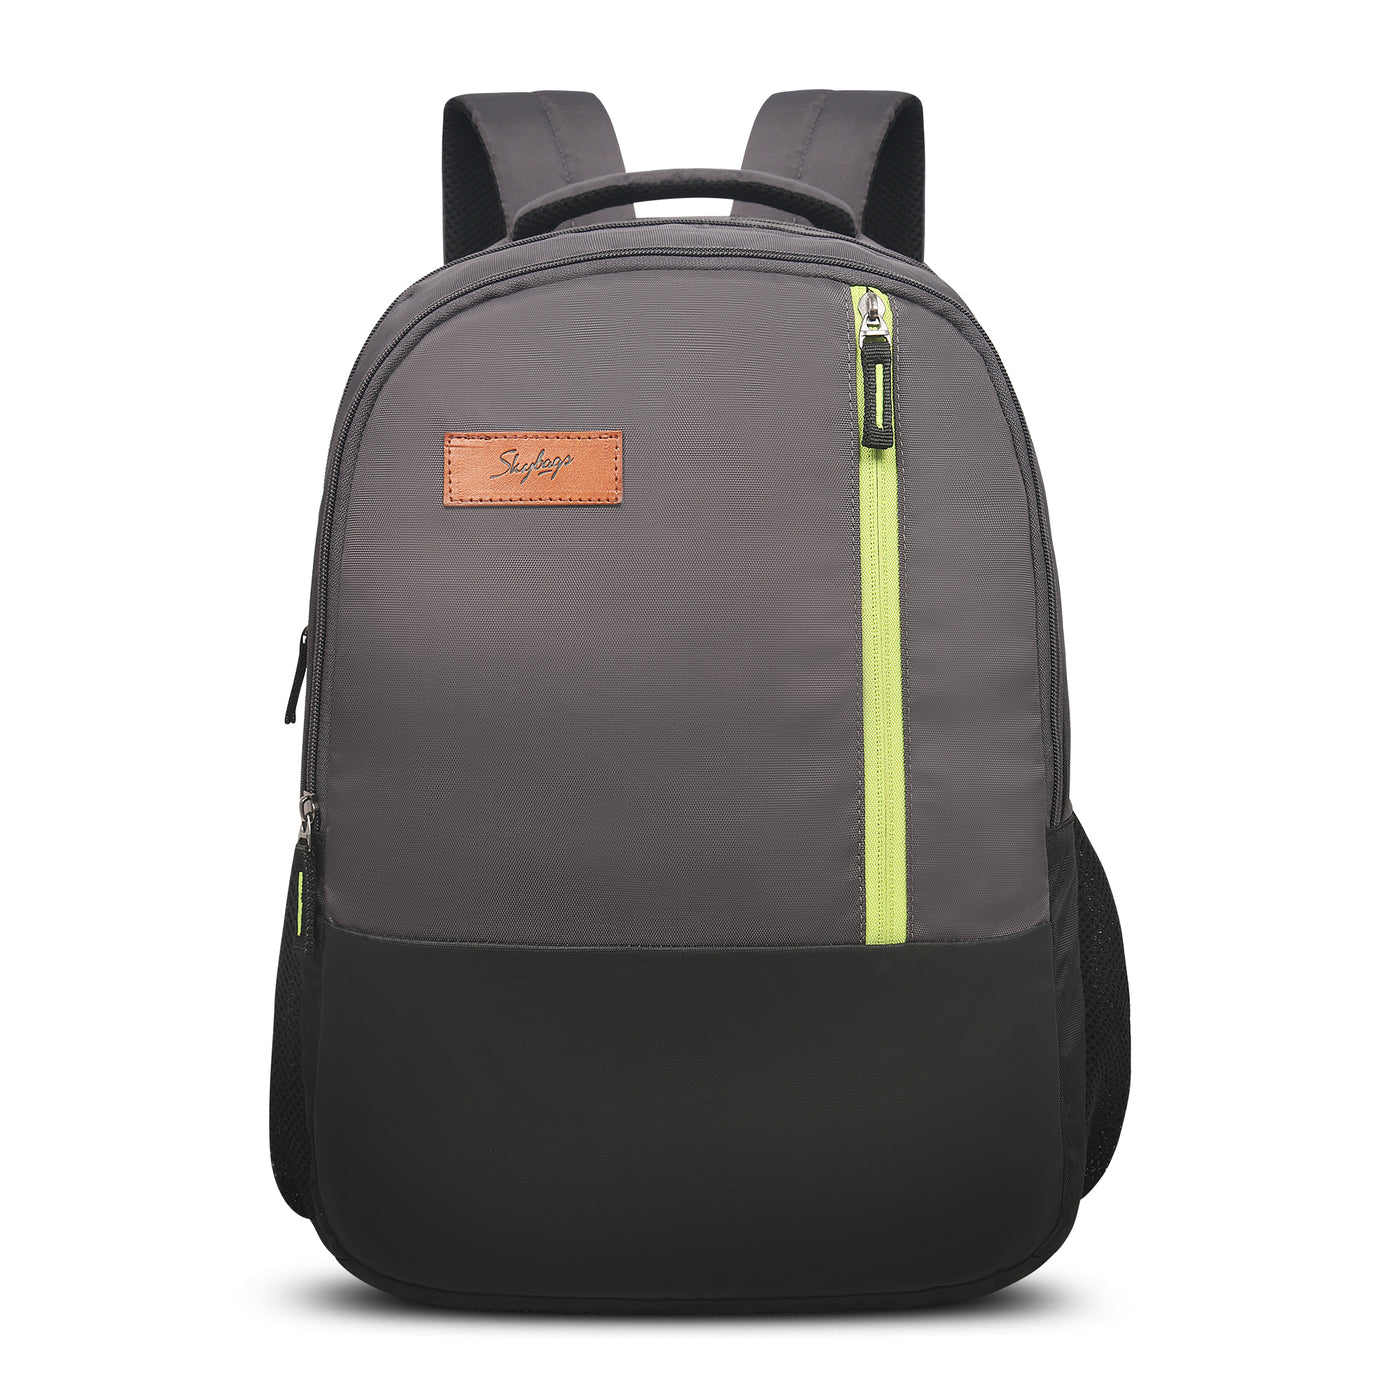 SKYBAGS CRUZE XL COLLEGE LAPTOP BACKPACK IRON 31 L Laptop Backpack IRON -  Price in India | Flipkart.com